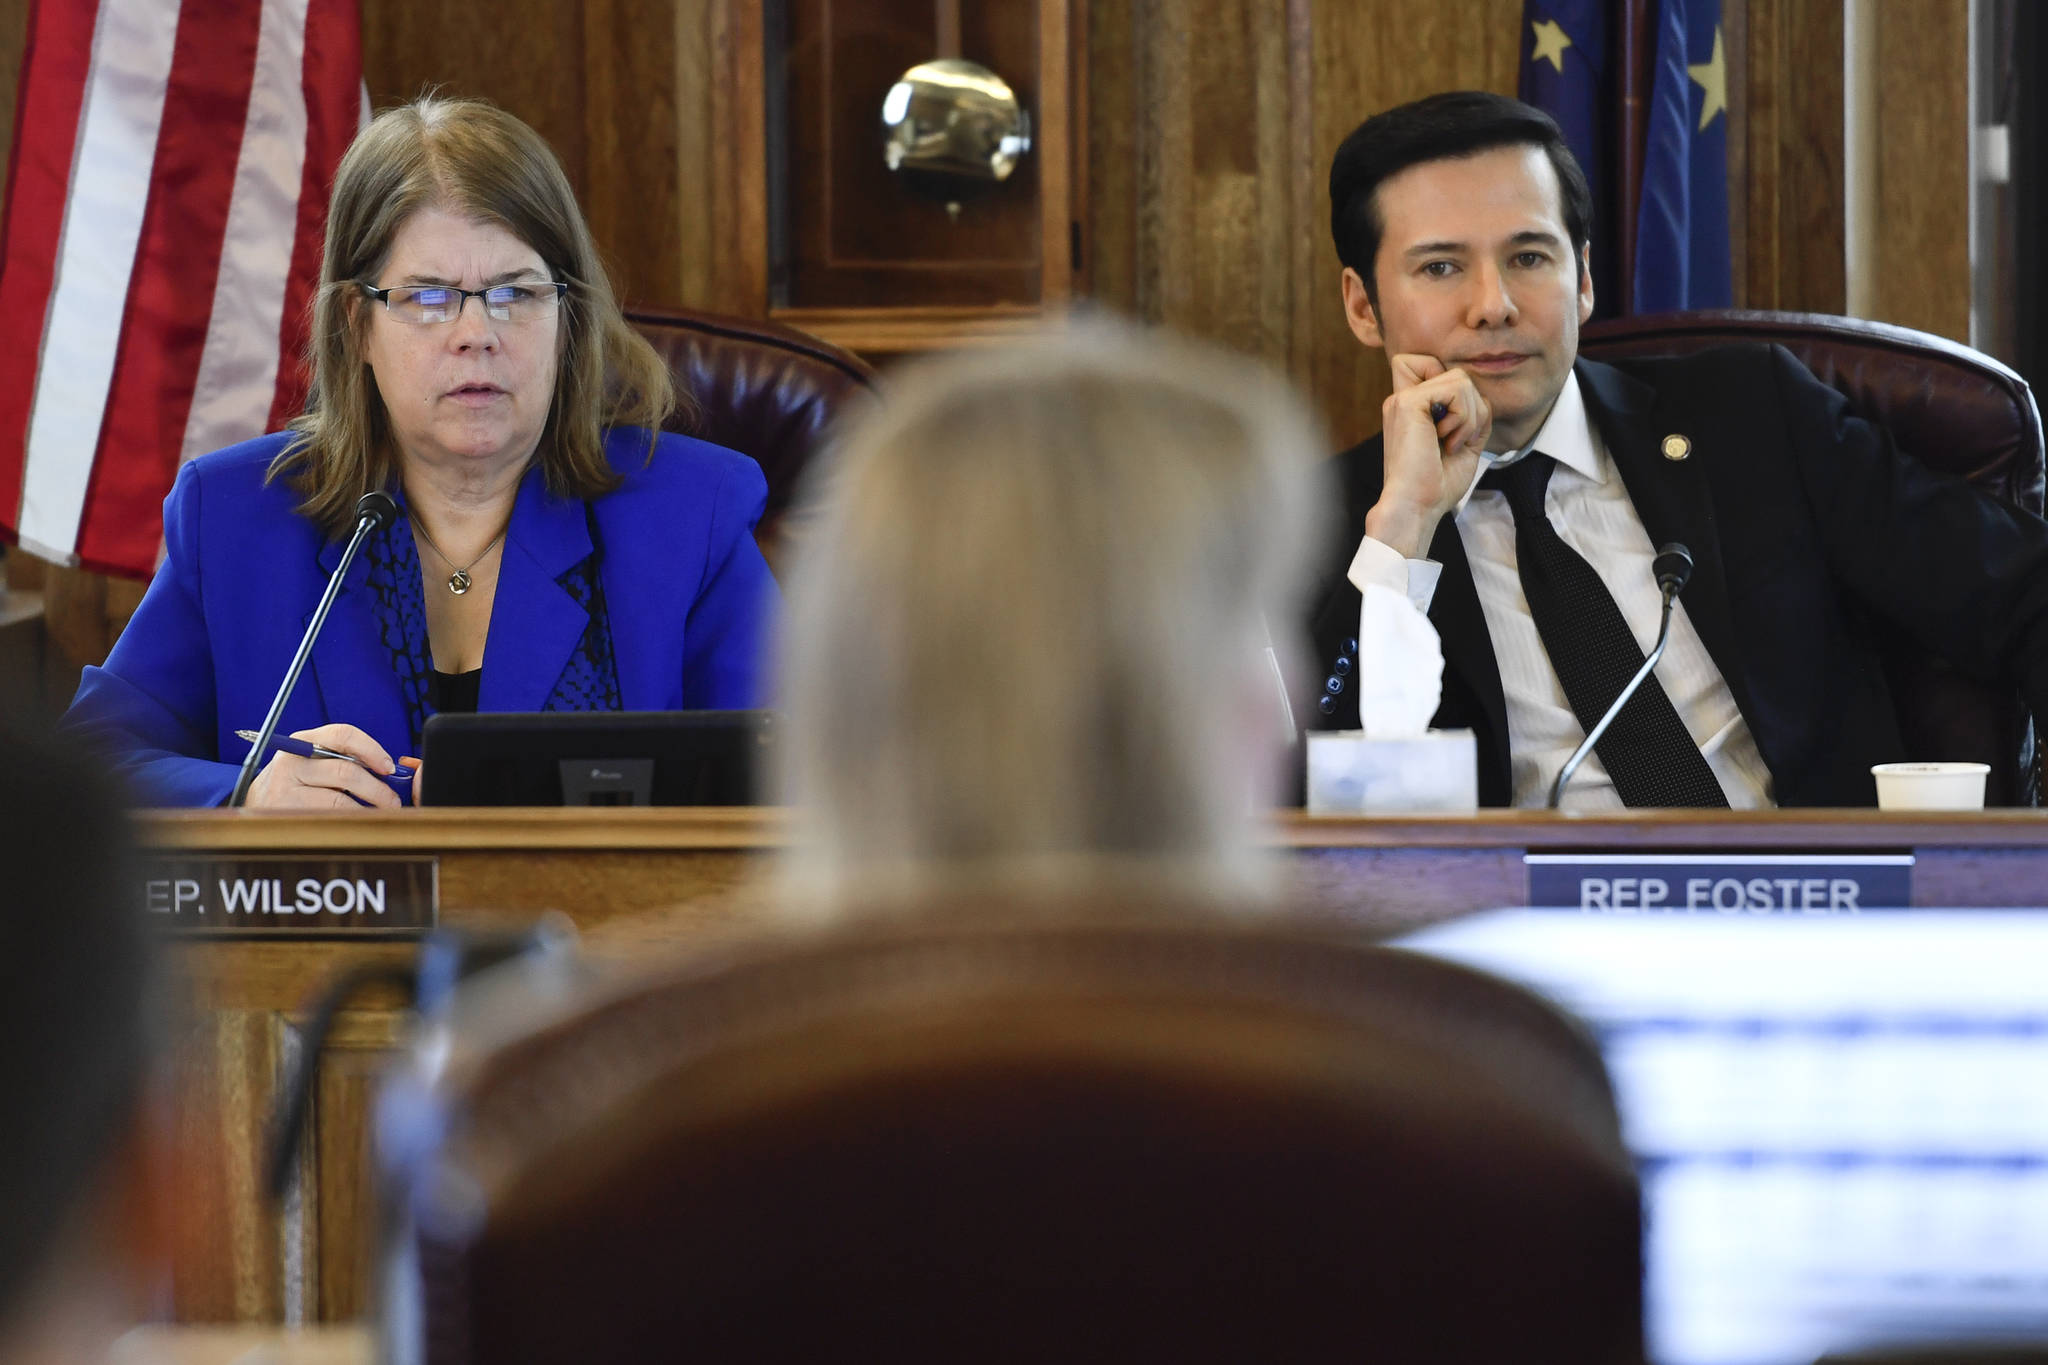 Co-Chairs of the House Finance Committee Rep. Tammie Wilson, R-North Pole, left, and Rep. Neal Foster, D-Nome, listen to Donna Arduin, Director of the Office of Management and Budget, as they hold their first meeting of the session at the Capitol on Thursday, Feb. 21, 2019. (Michael Penn | Juneau Empire)